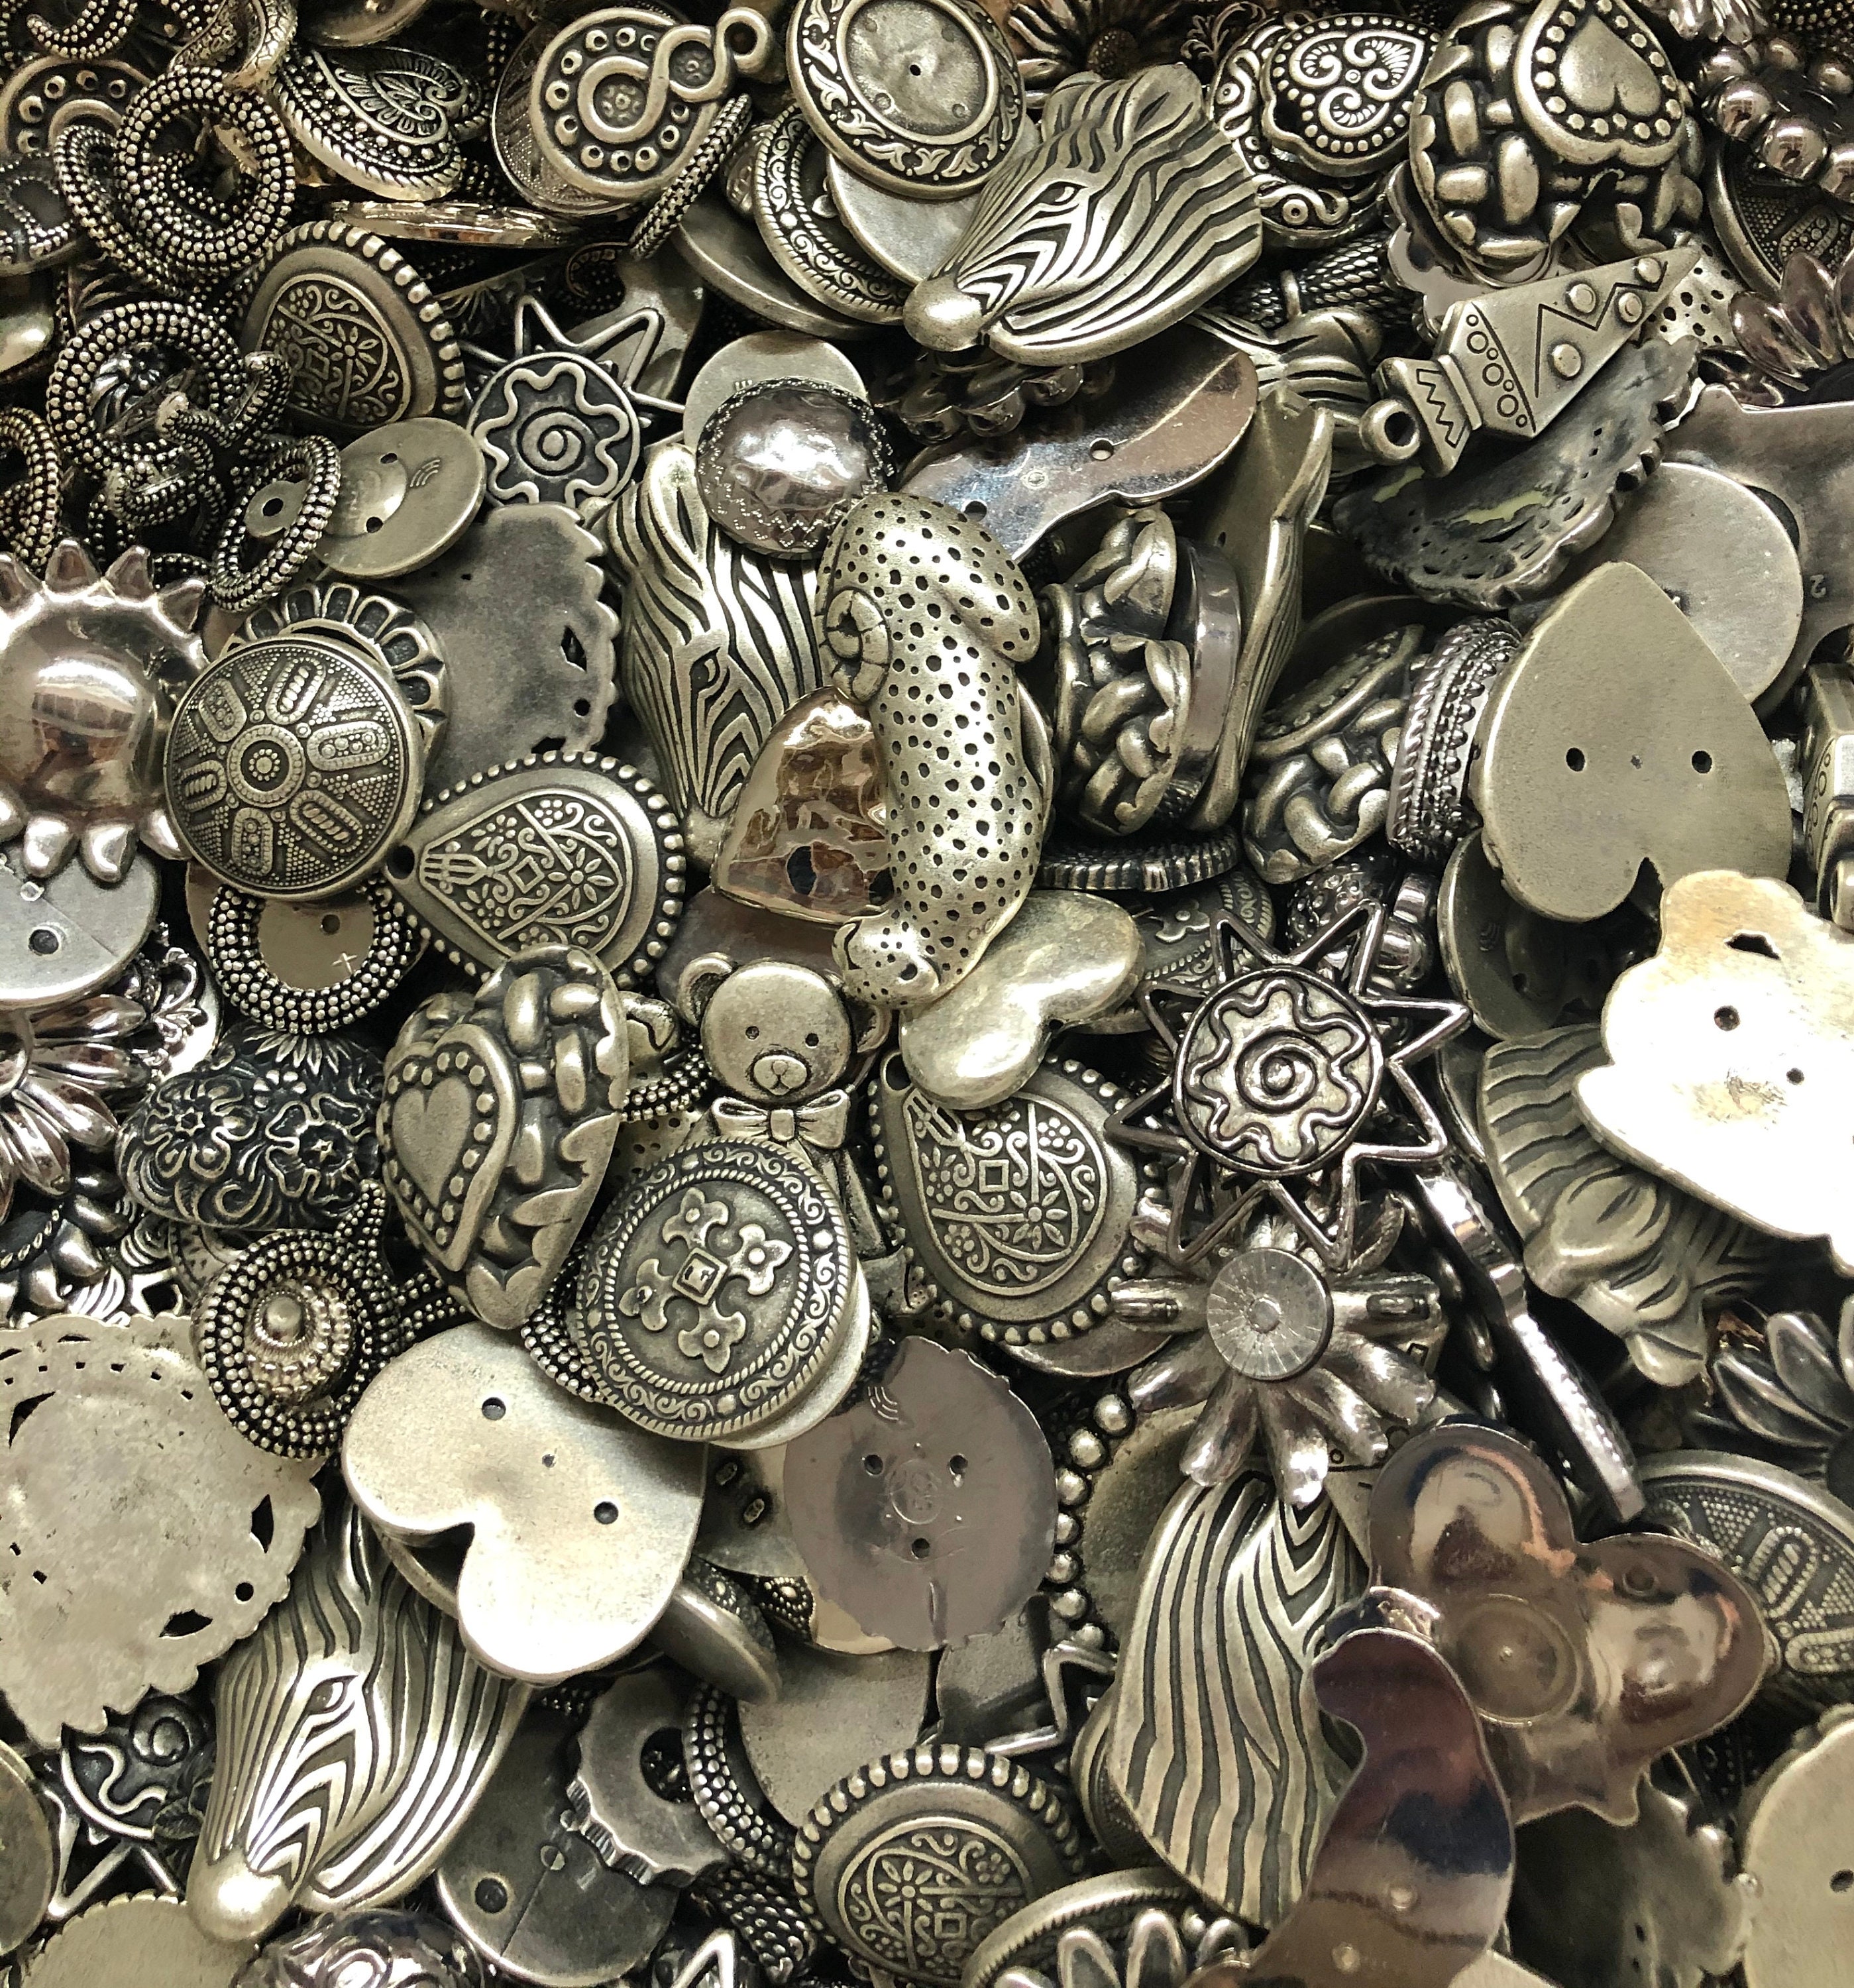 Silver-Plated Clothing Buttons - Jackets, Coats, Crafts & Sewing